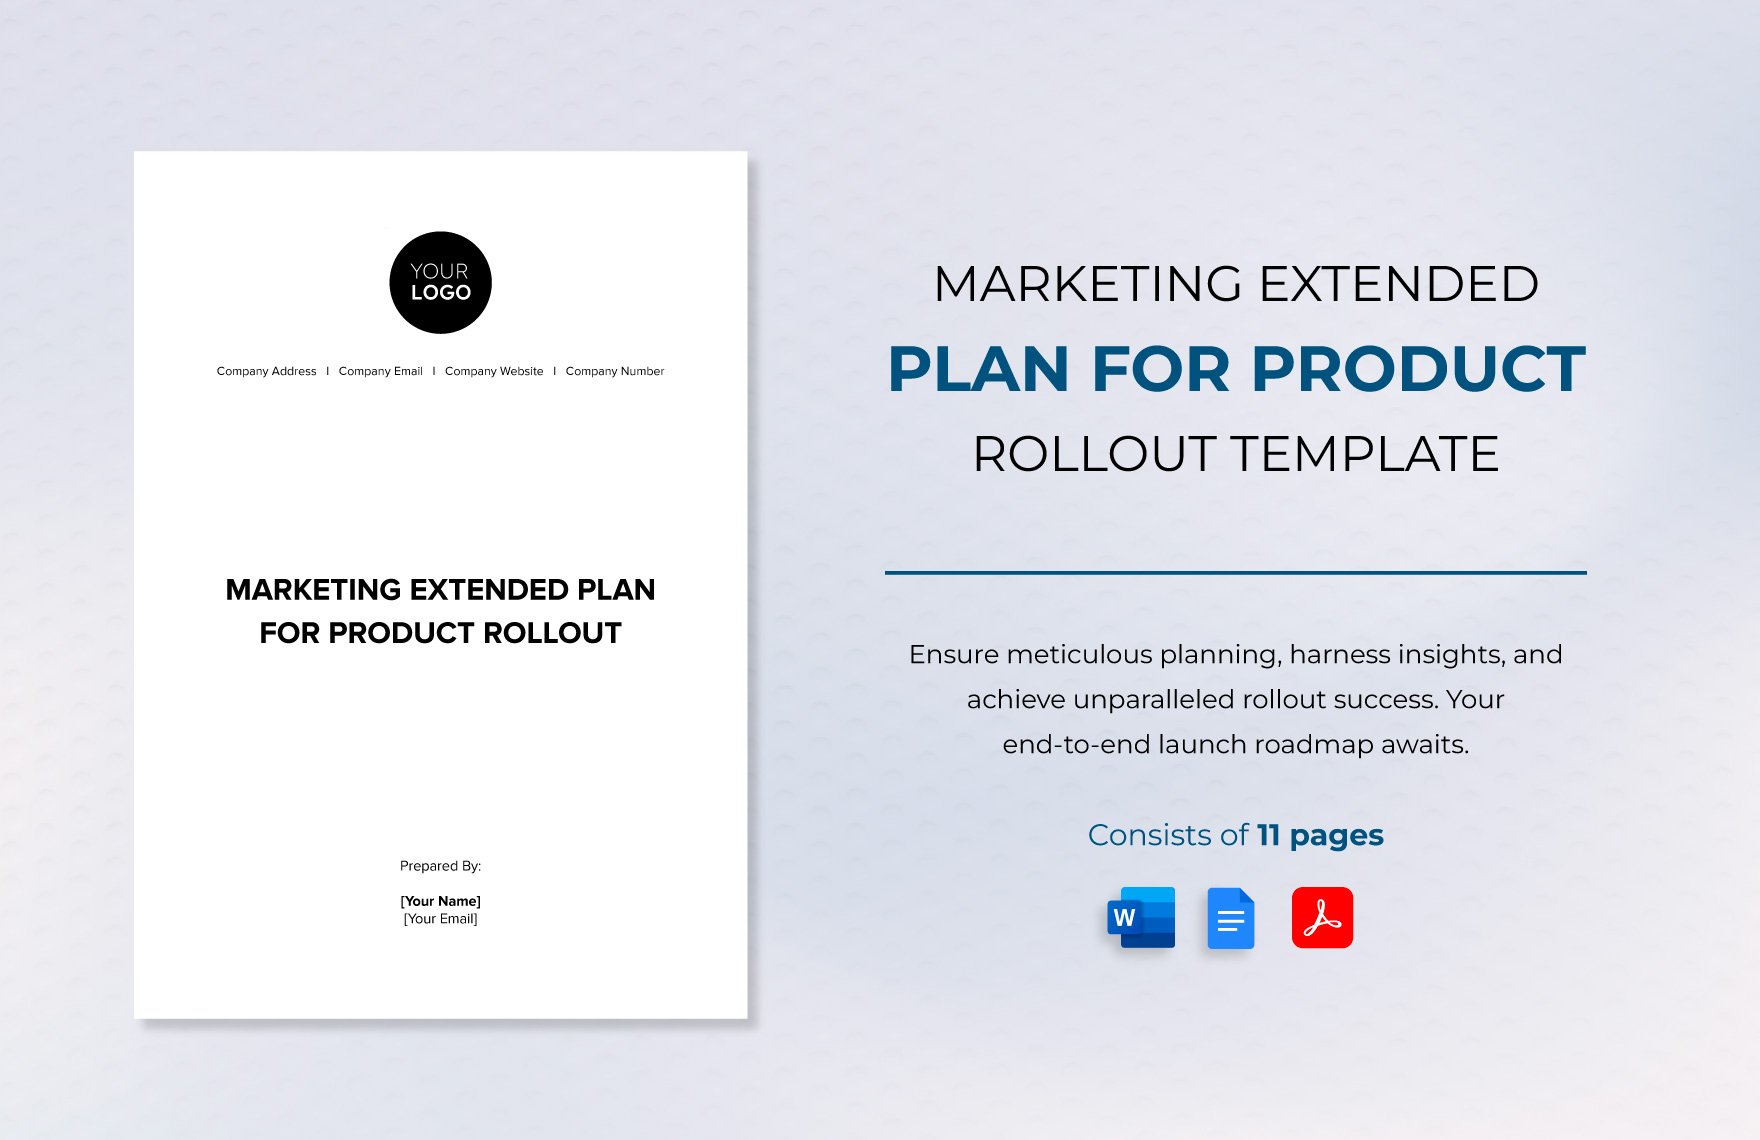 Marketing Extended Plan for Product Rollout Template in Word, Google Docs, PDF